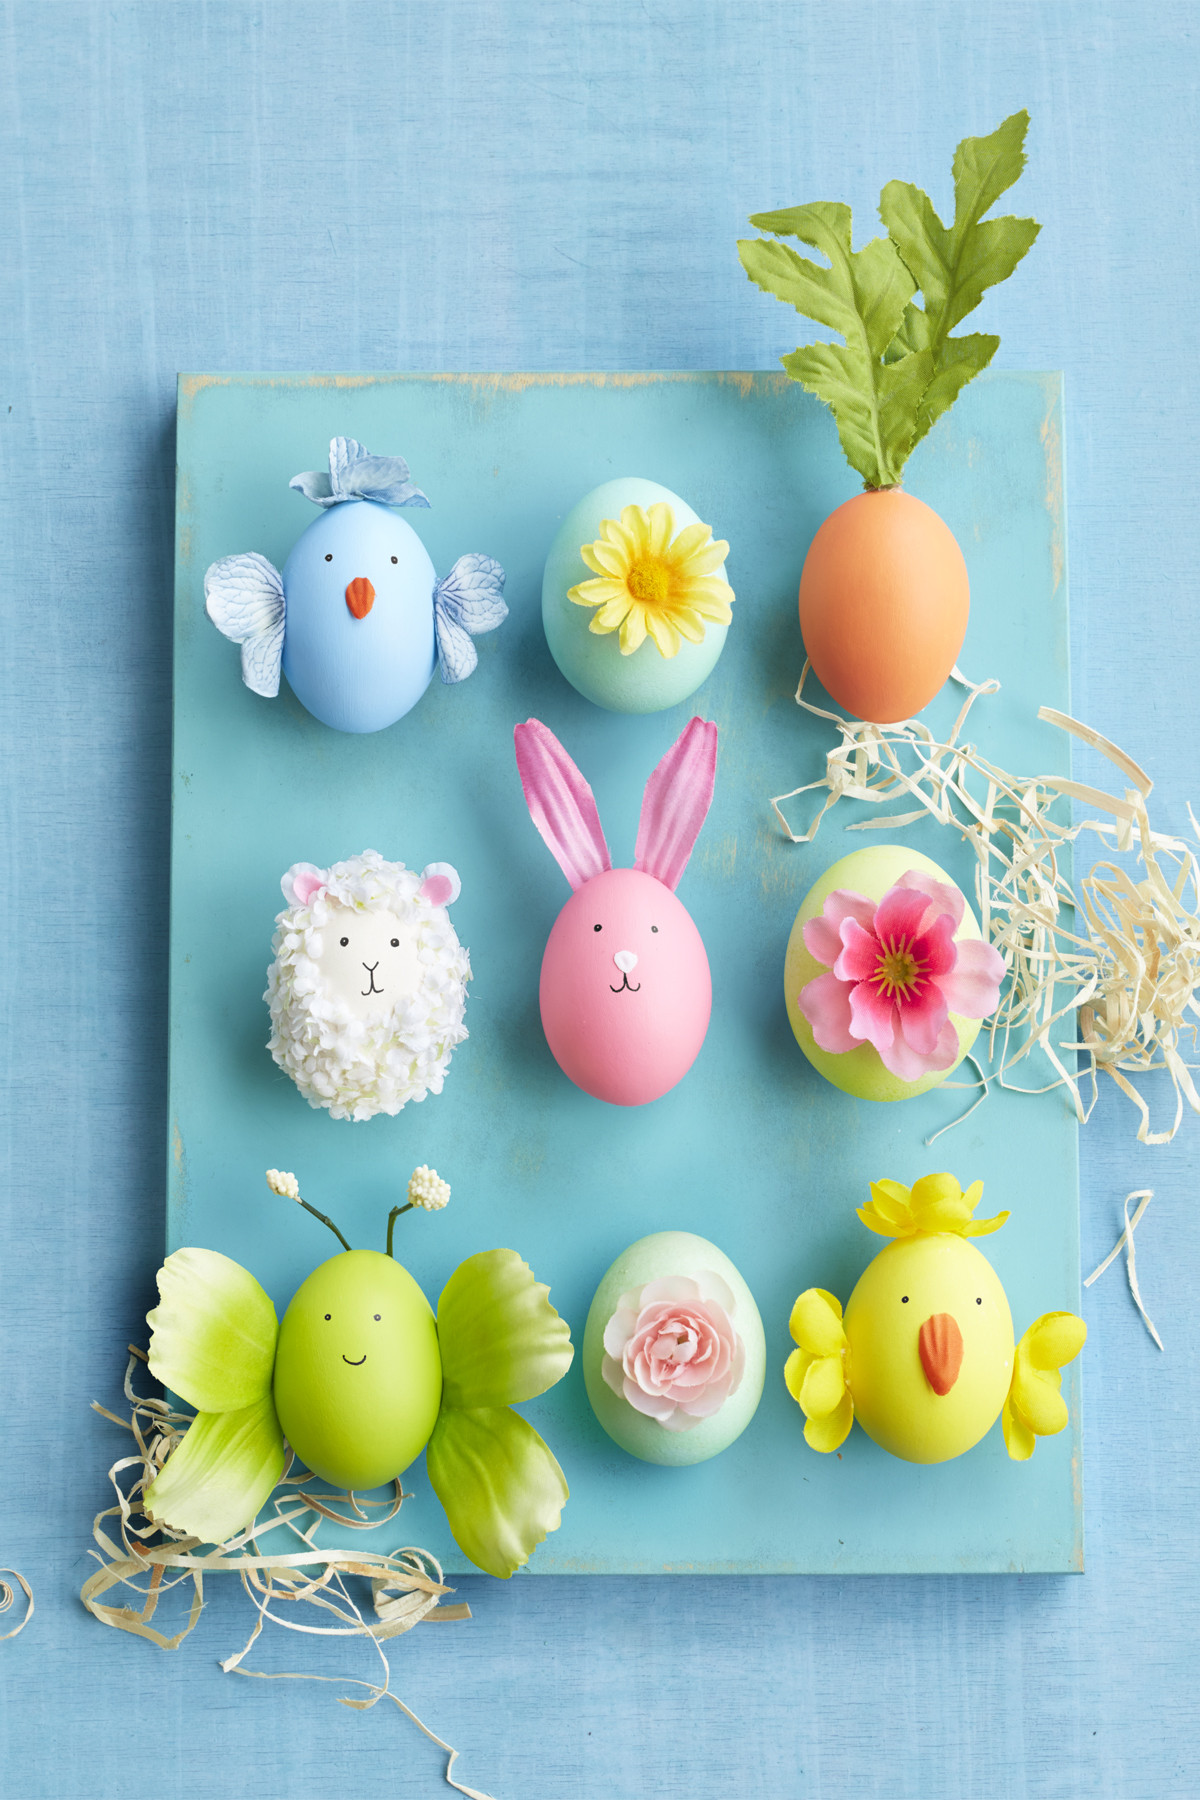 Easter Egg Decorating Ideas
 42 Cool Easter Egg Decorating Ideas Creative Designs for